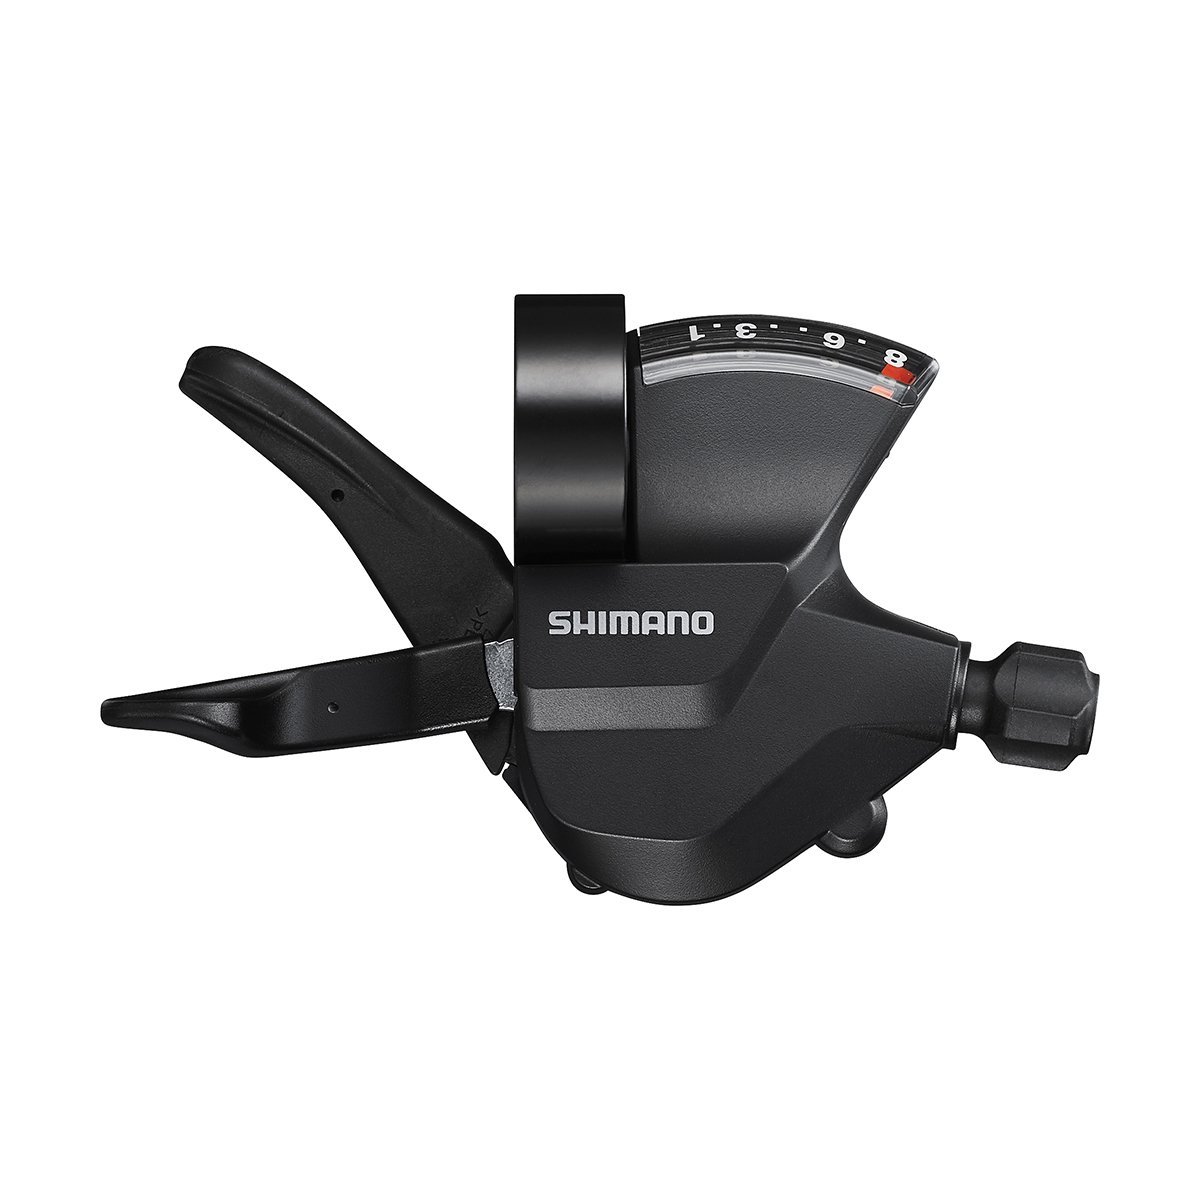 SHIMANO SHİFT LEVER RİGHT 8S W/OGD SL-M315-8R INCL. CABLES